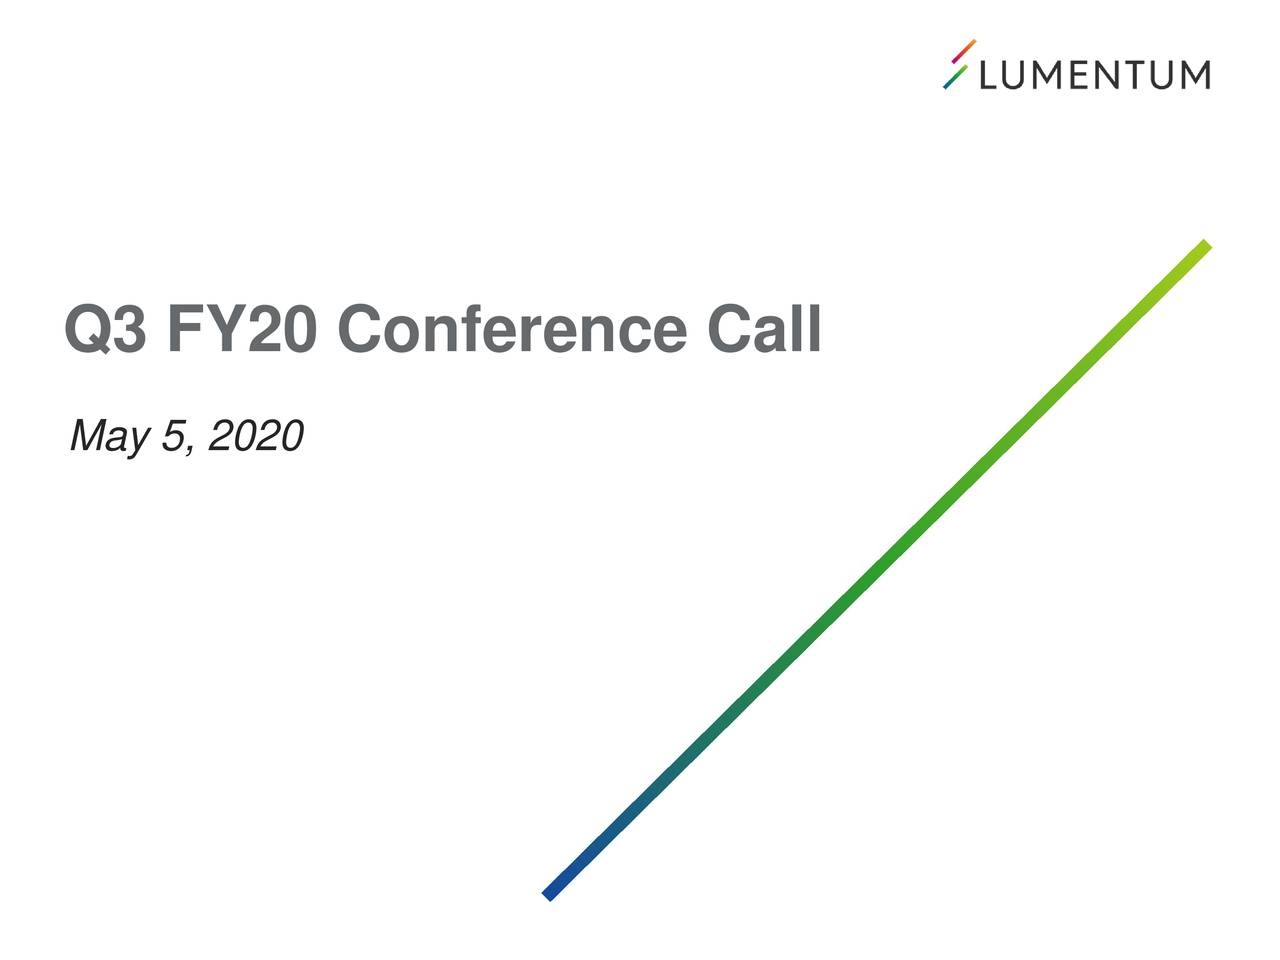 Q3 FY20 Conference Call